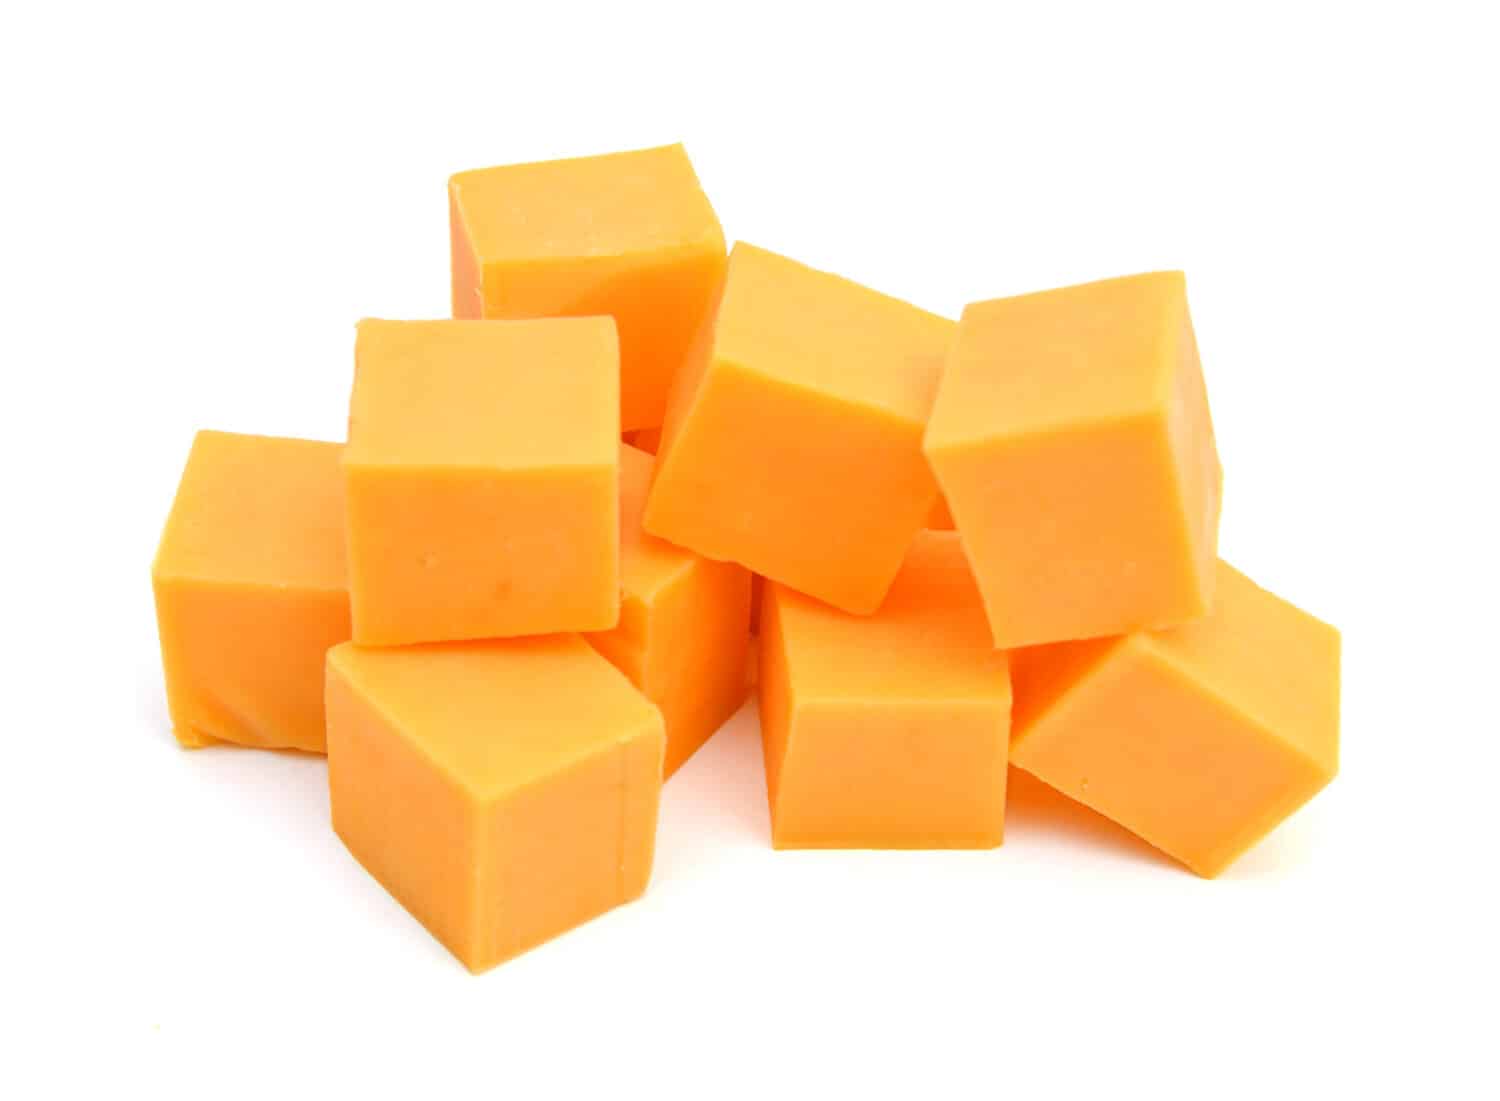 Cubes of cheddar cheese isolated on white 